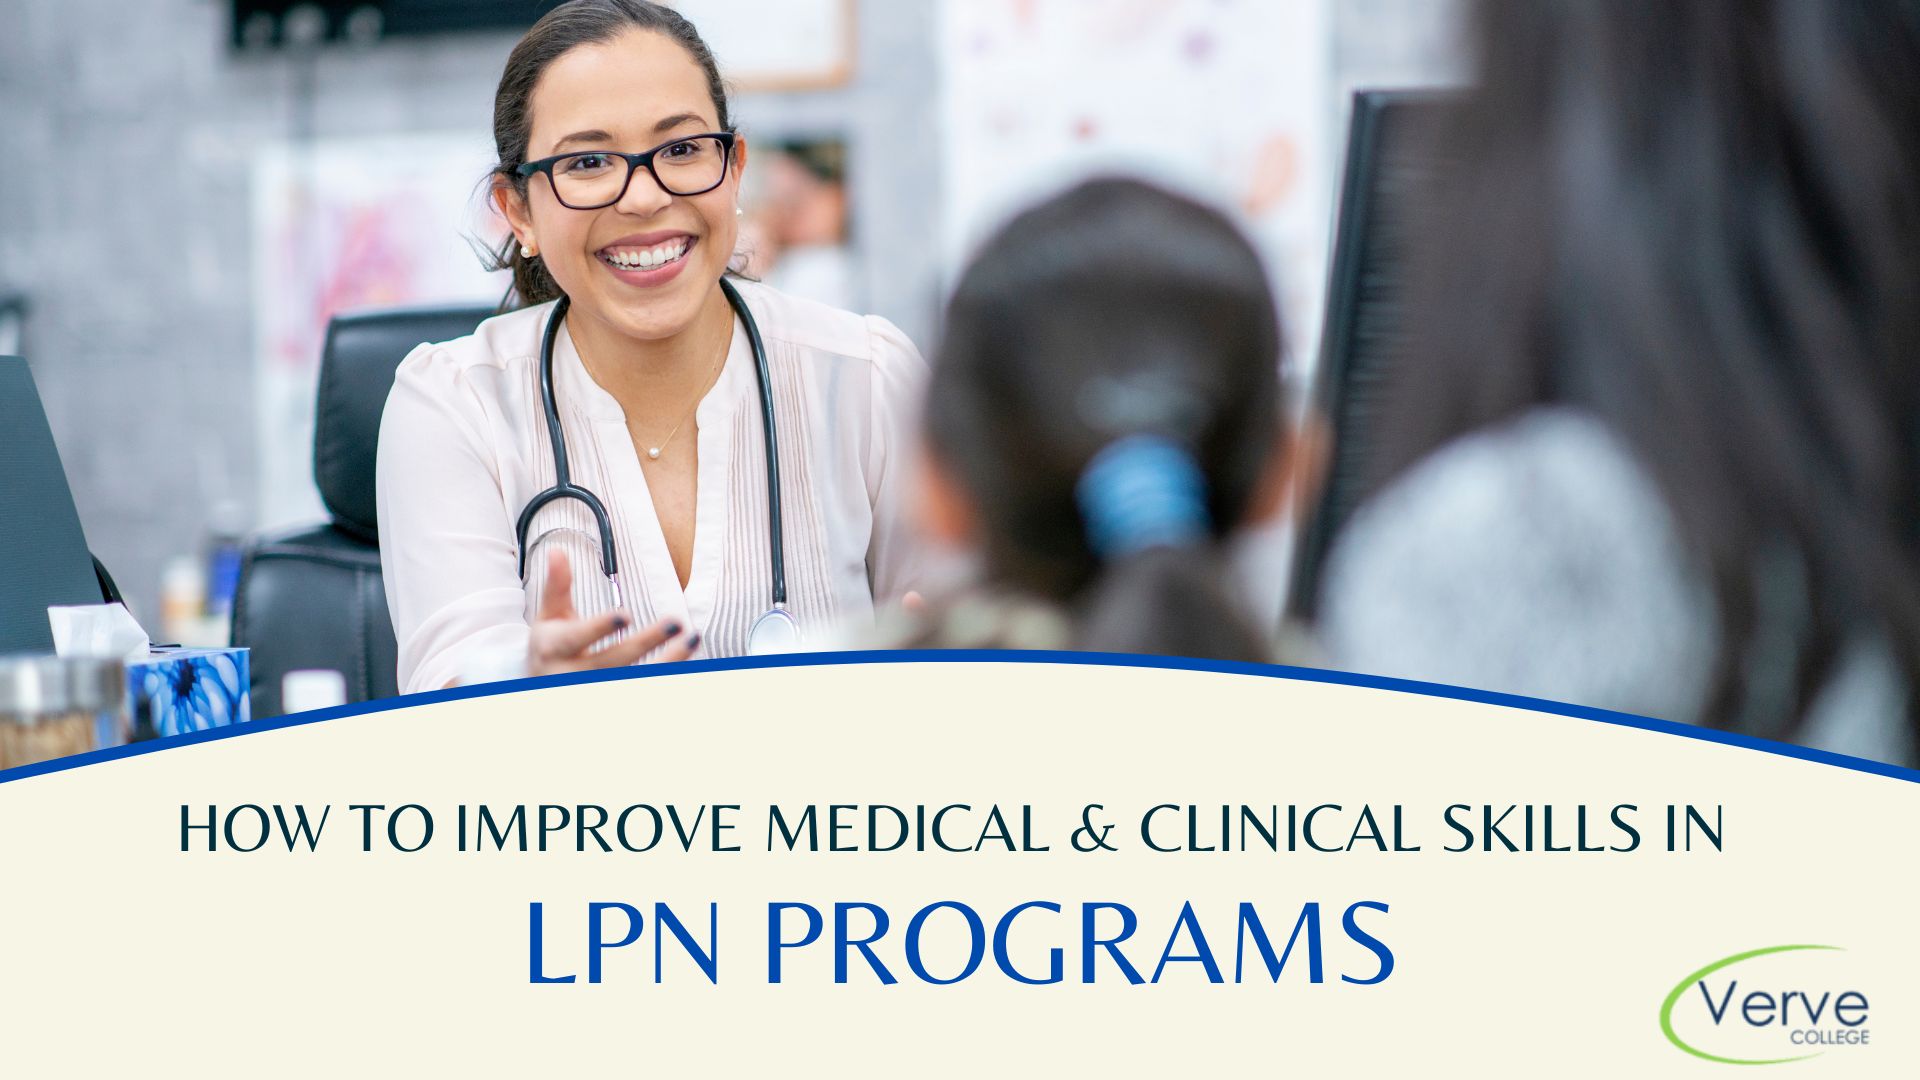 How to Improve Medical & Clinical Skills in LPN Programs